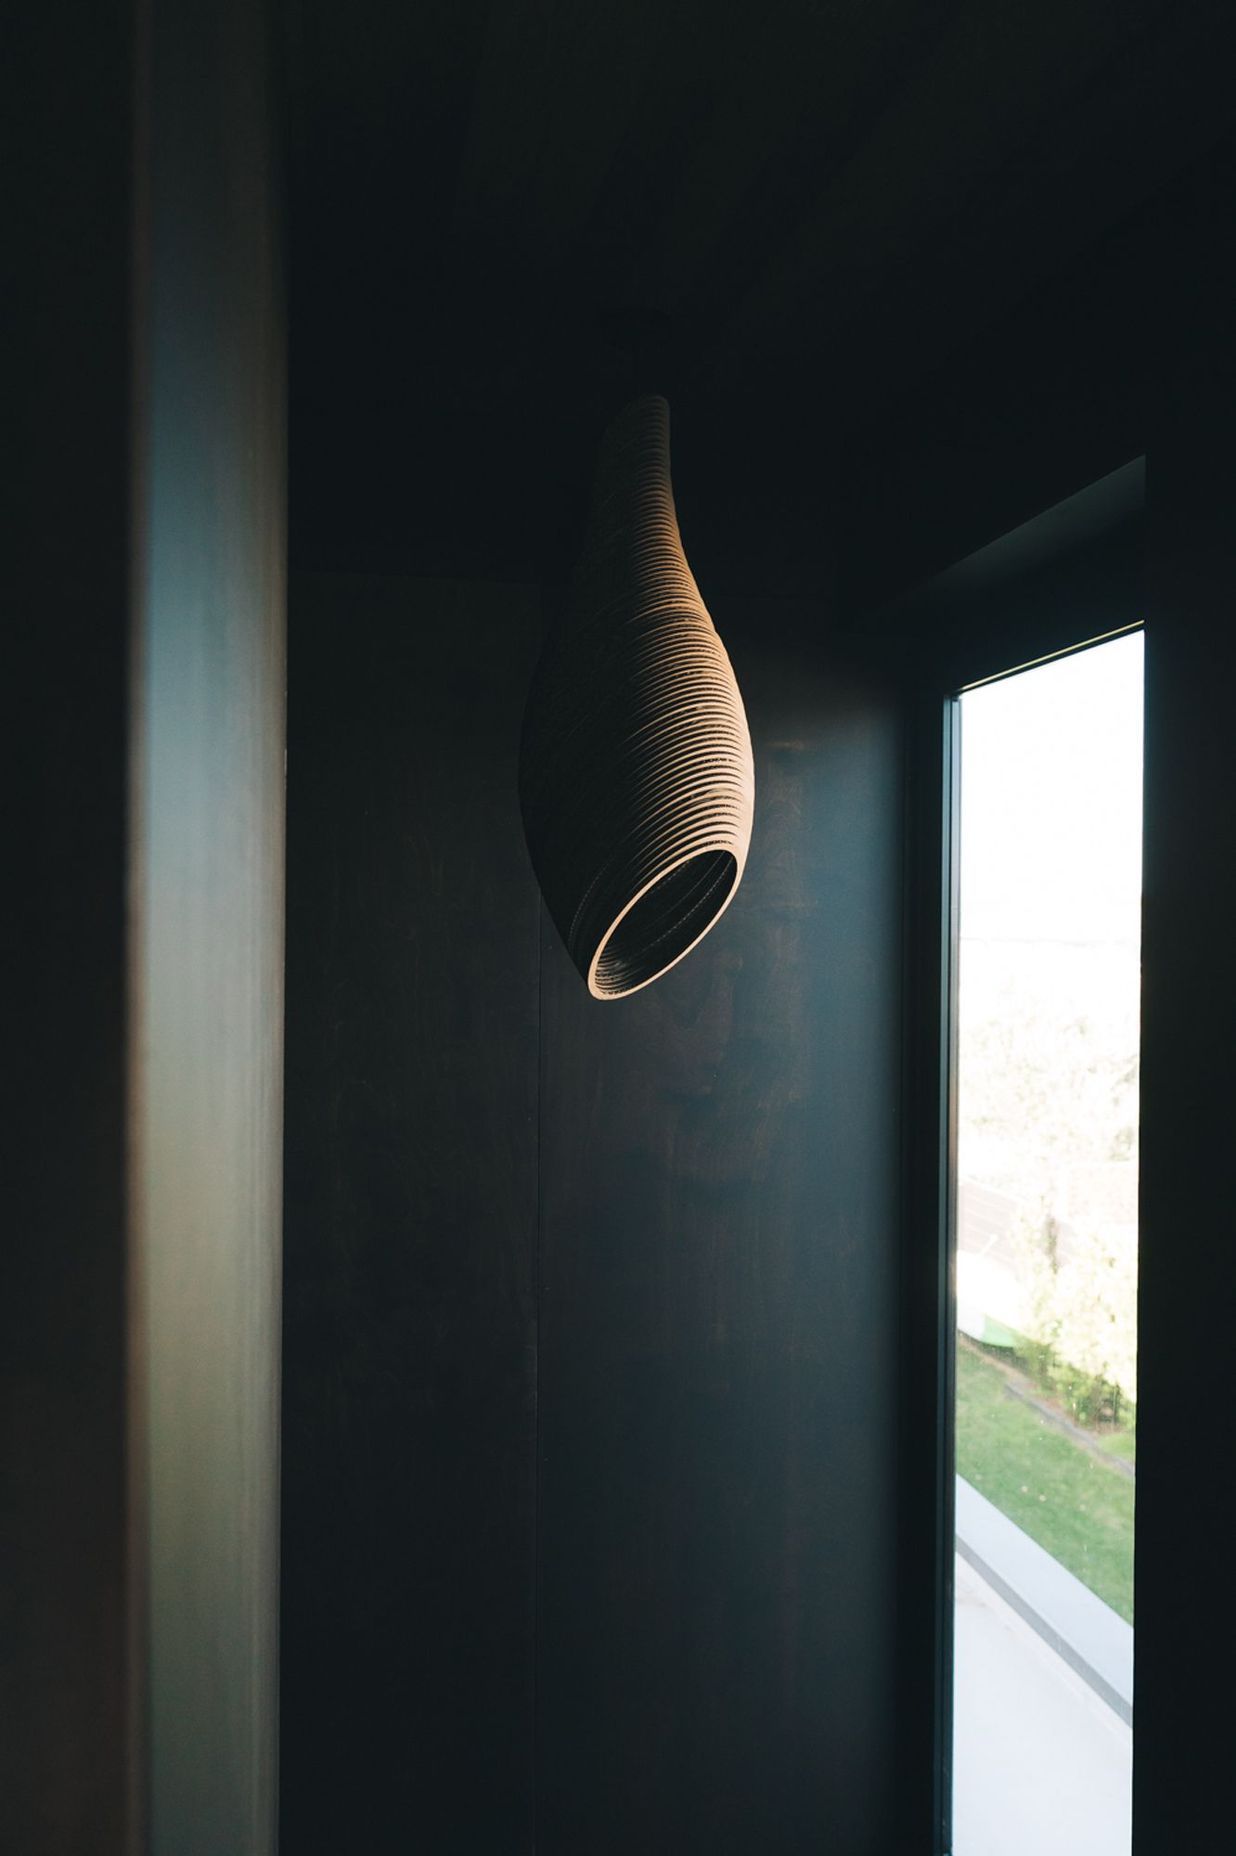 A light feature made of laser-cut cardboard hangs above the stairwell.